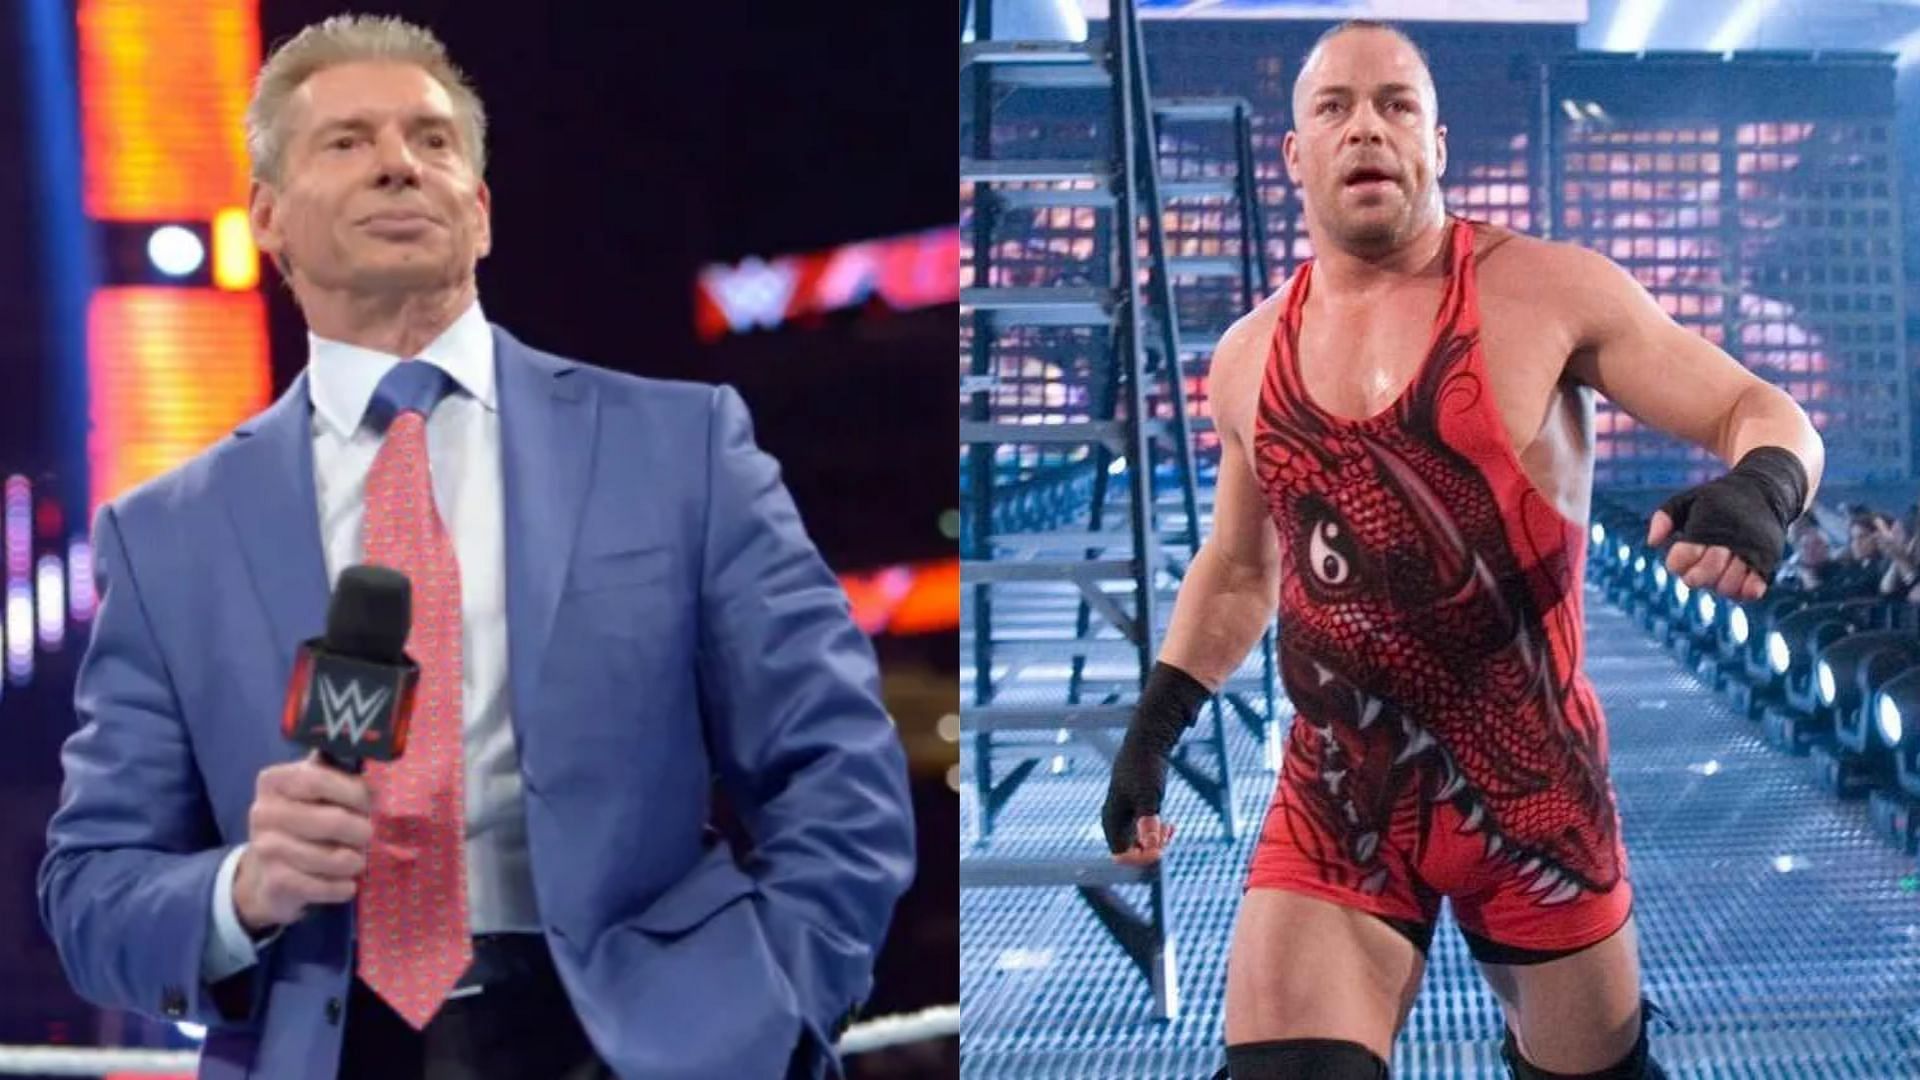 Vince McMahon turned down hiring AEW name despite backing from WWE legend Rob Van Dam